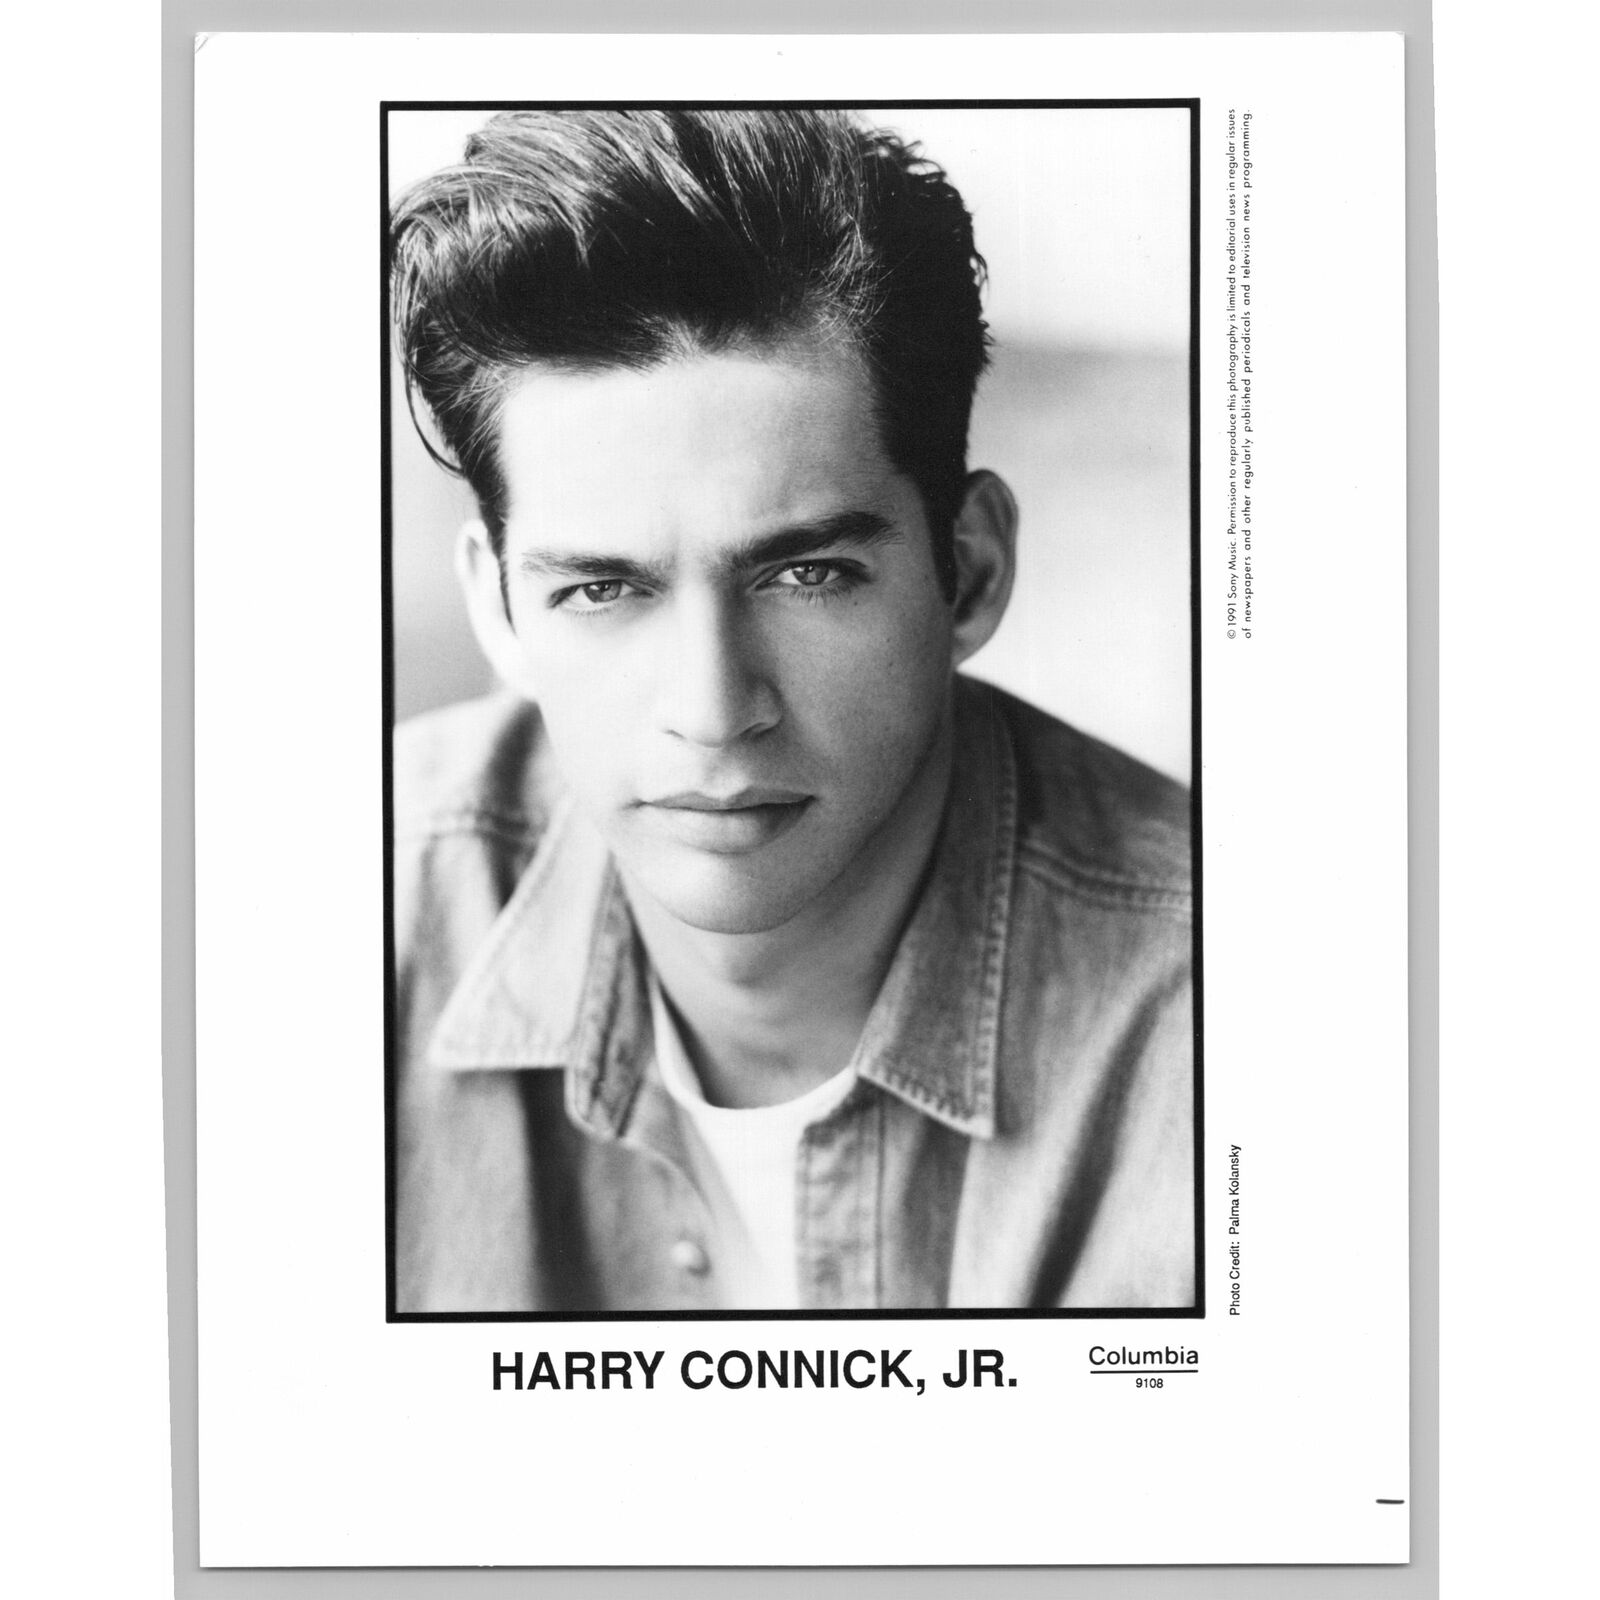 Harry Connick Jr. American Singer Pianist Actor Composer 1991 Music Press Photo